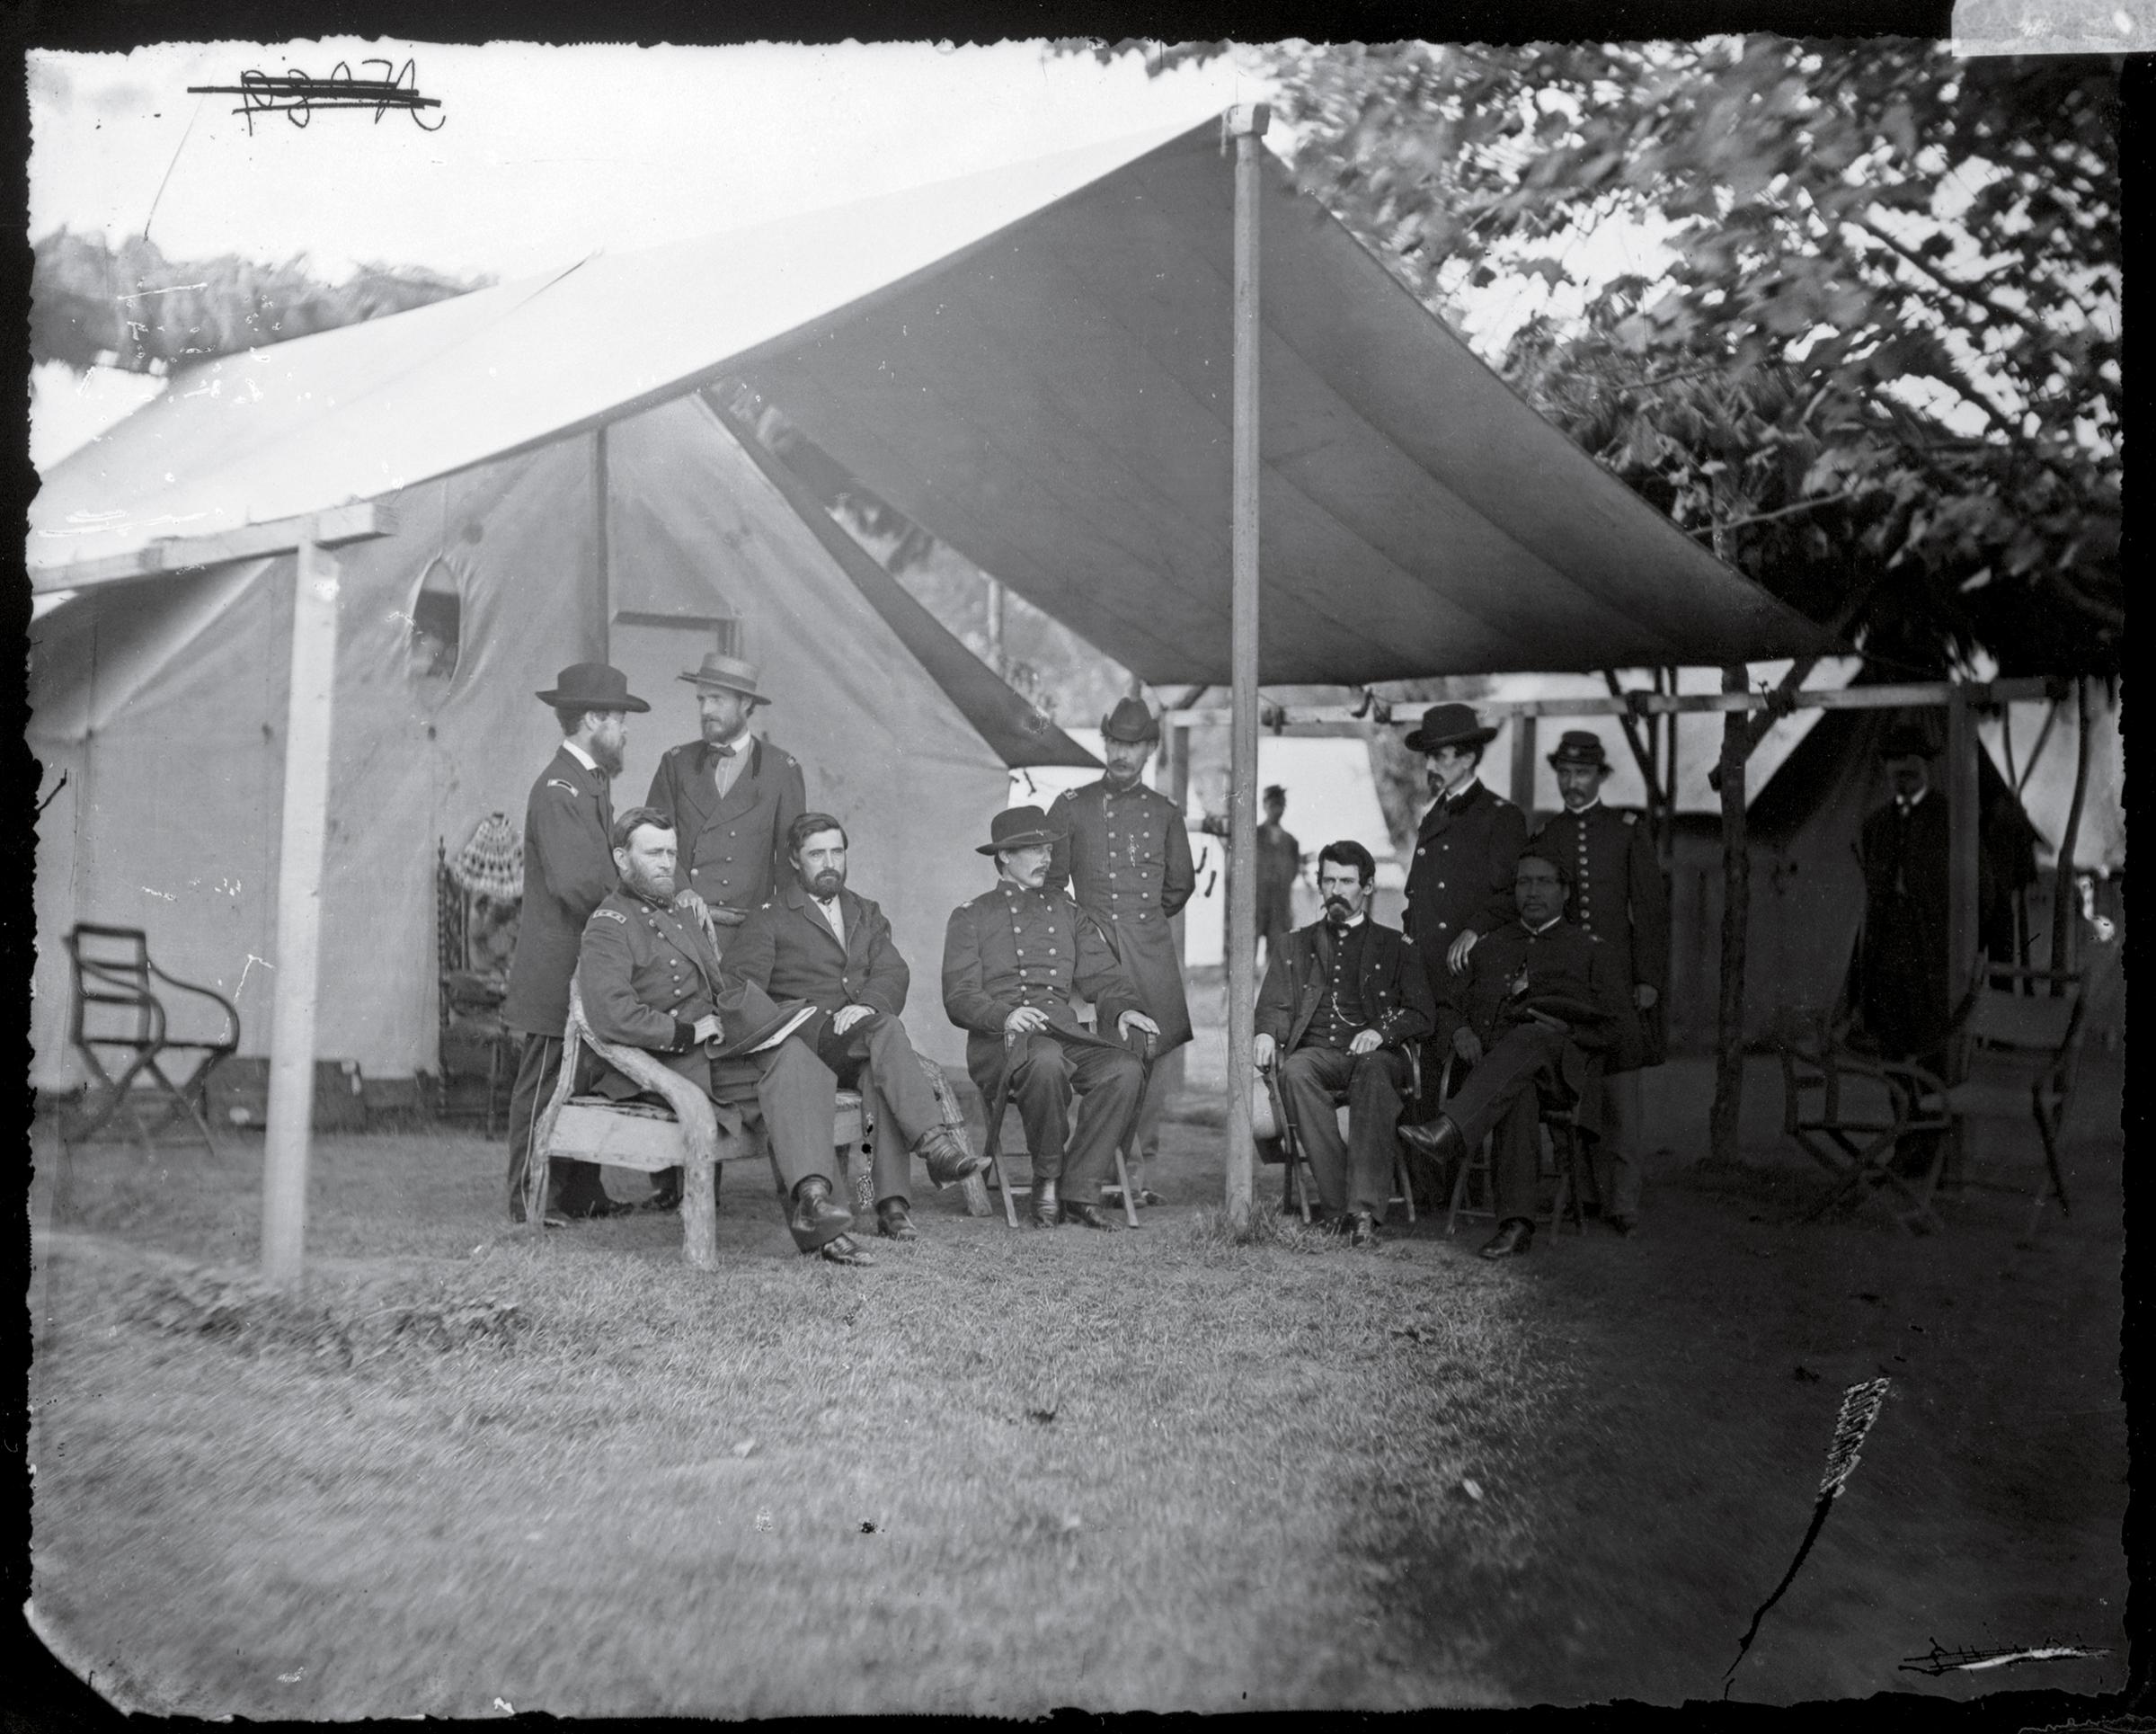 U.S. Grant and Staff Ron Chernow The Rest is History